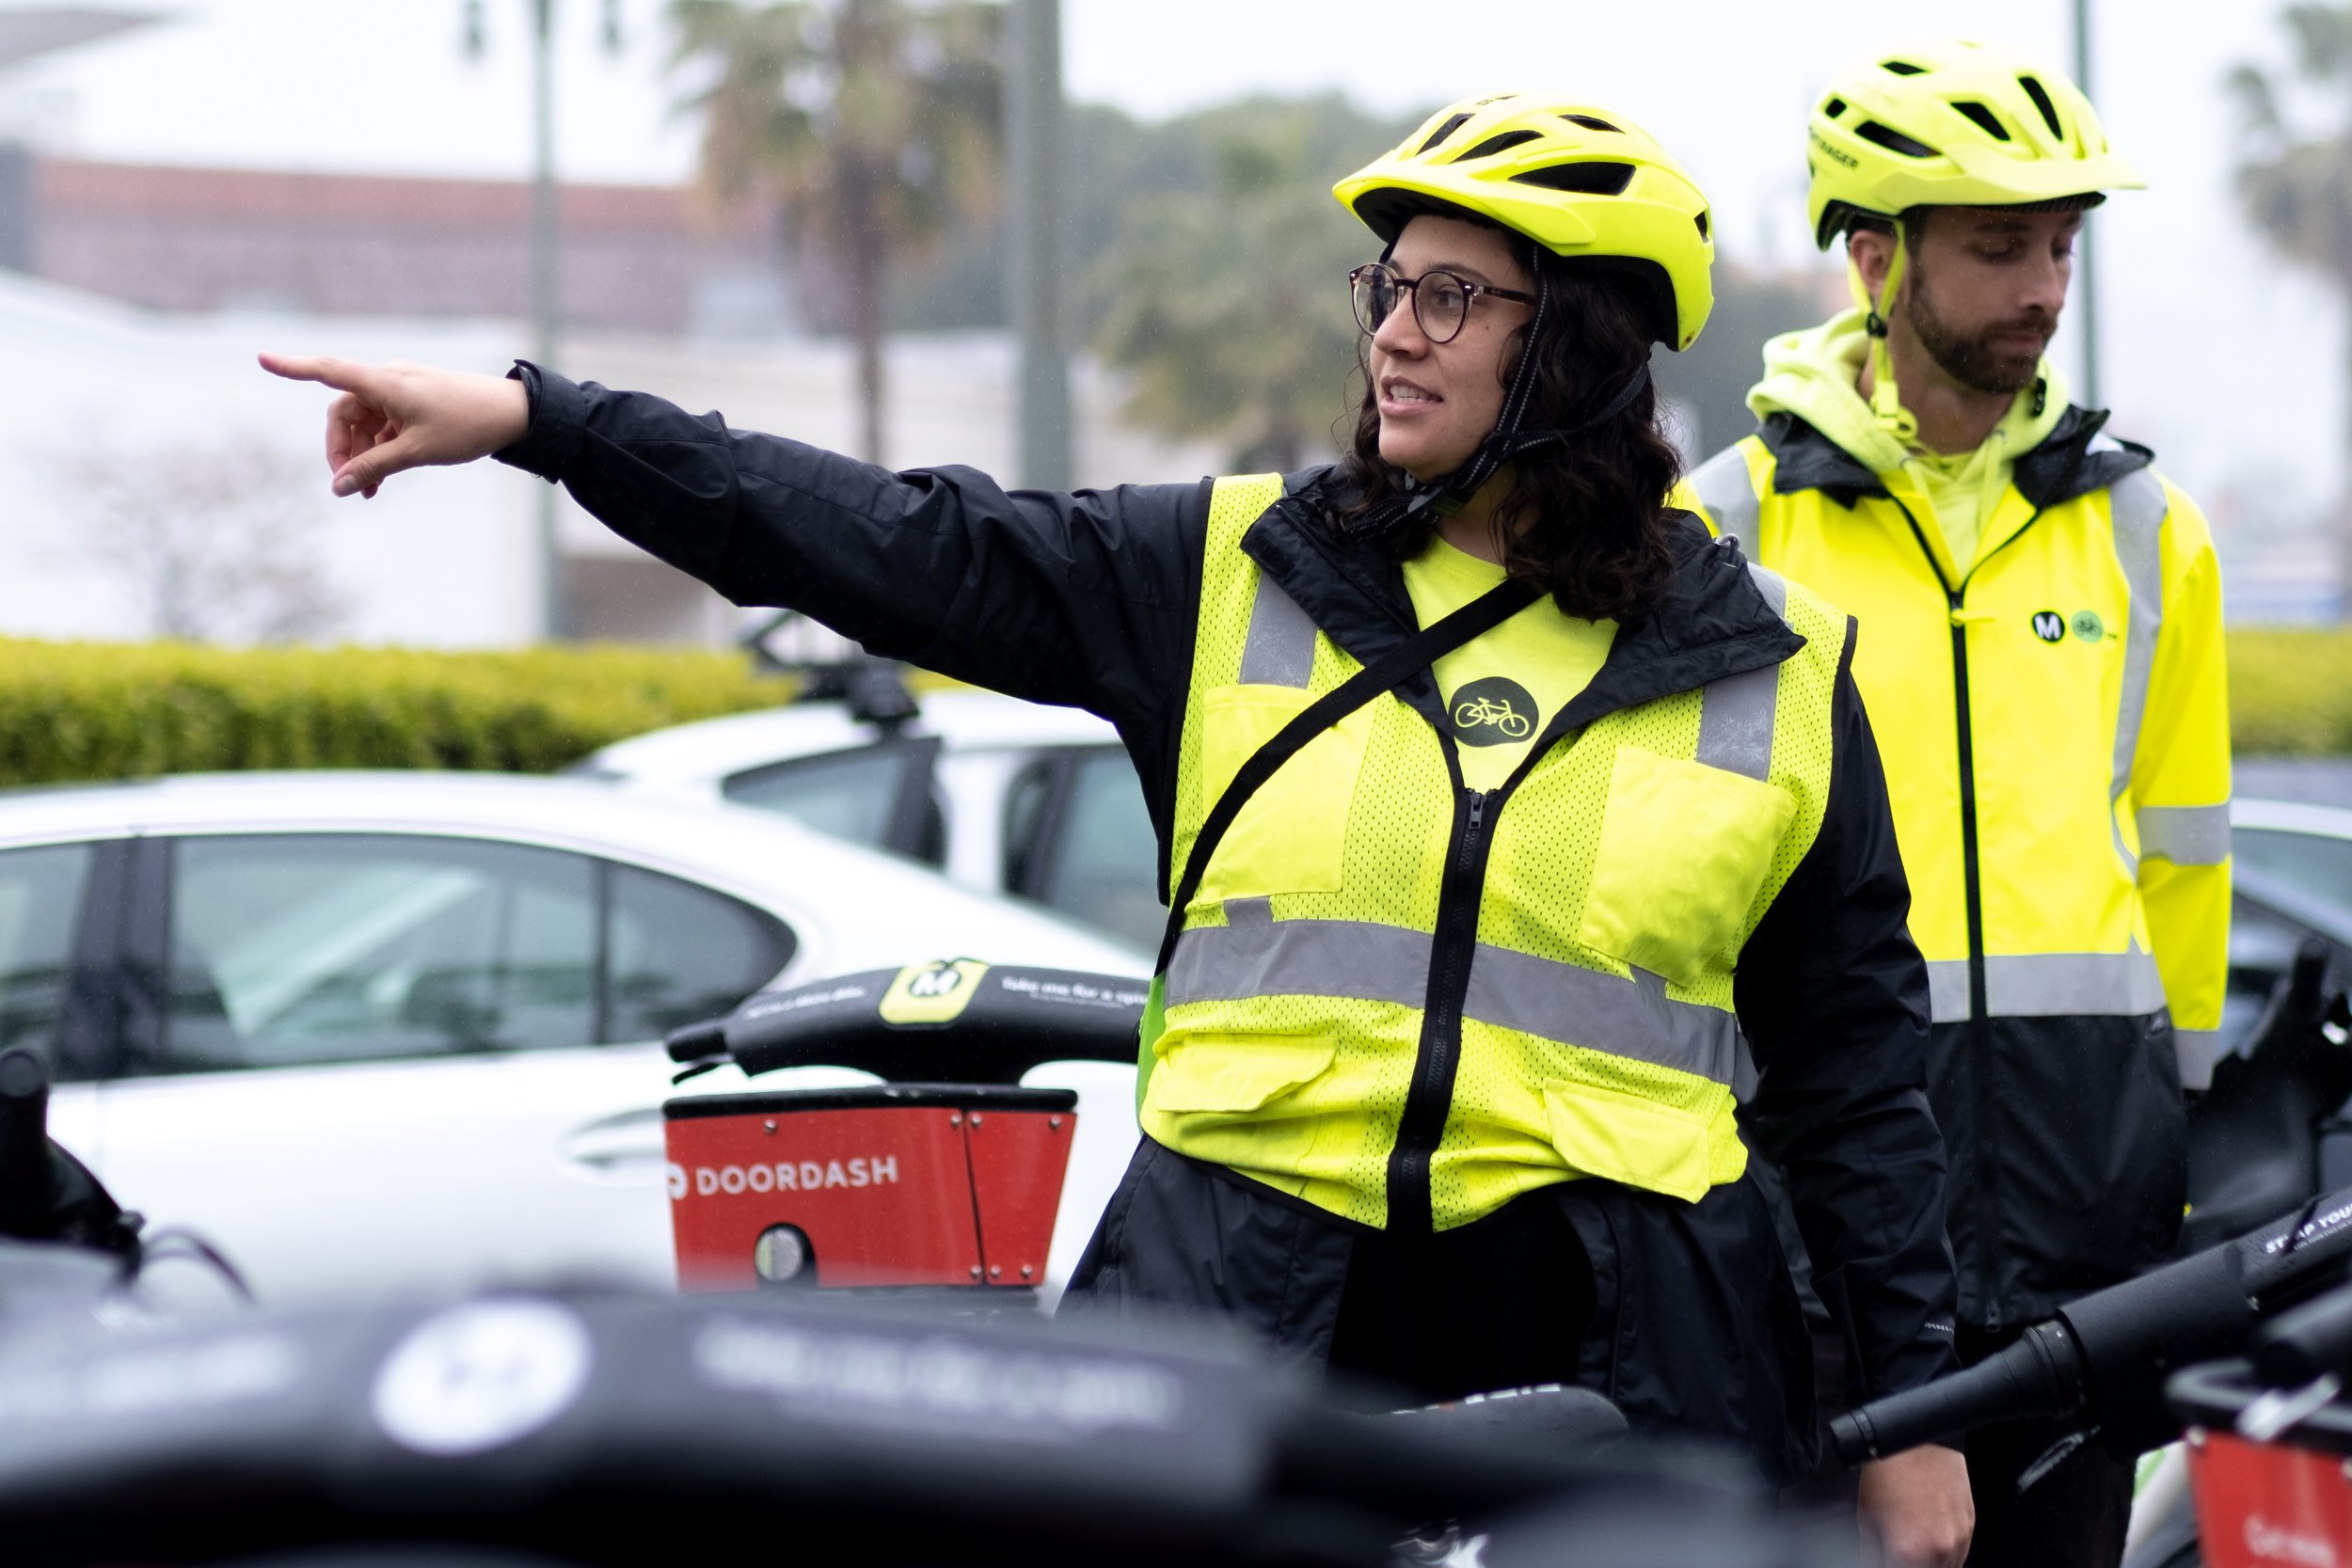  Kimberly Fisher, Senior Marketing Coordinator for Outreach, explains the route we will be taking on the Metro Bike Share Women's History Community Ride this rainy morning in Downtown Los Angeles, Calif. on Saturday, March 11, 2023. (Akemi Rico | The